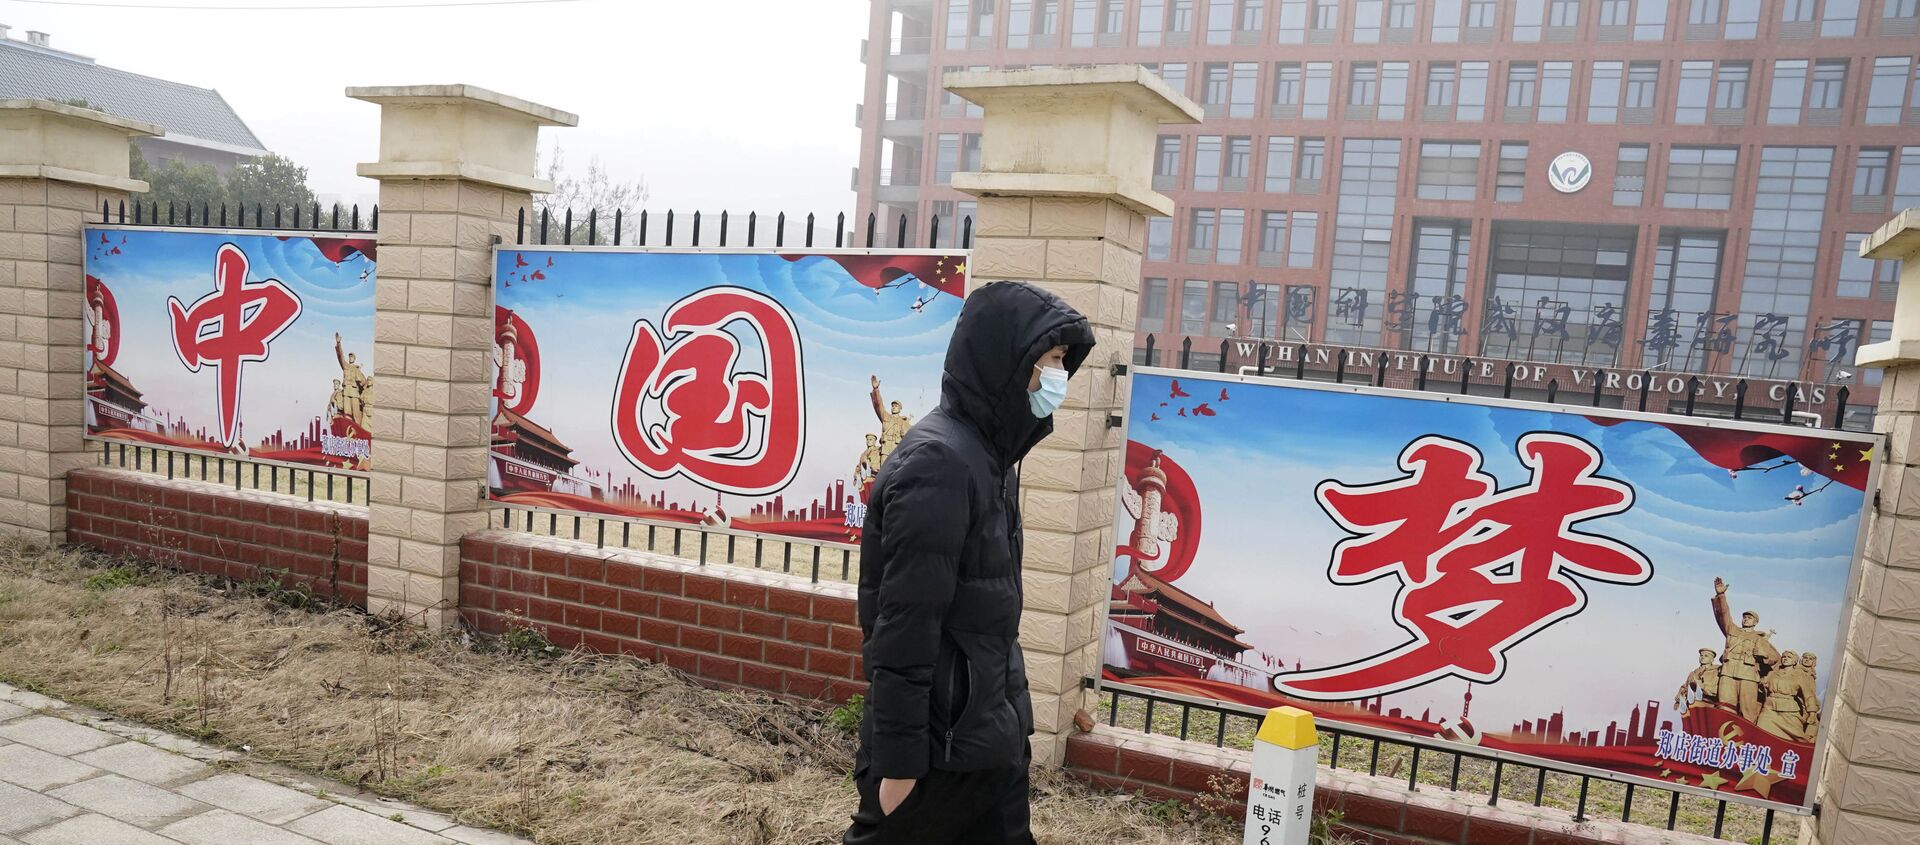 A man passes by the words China Dream outside the entrance to the Wuhan Institute of Virology during a visit by a World Health Organization team in Wuhan in China's Hubei province on Wednesday, Feb. 3, 2021 - Sputnik International, 1920, 03.08.2021